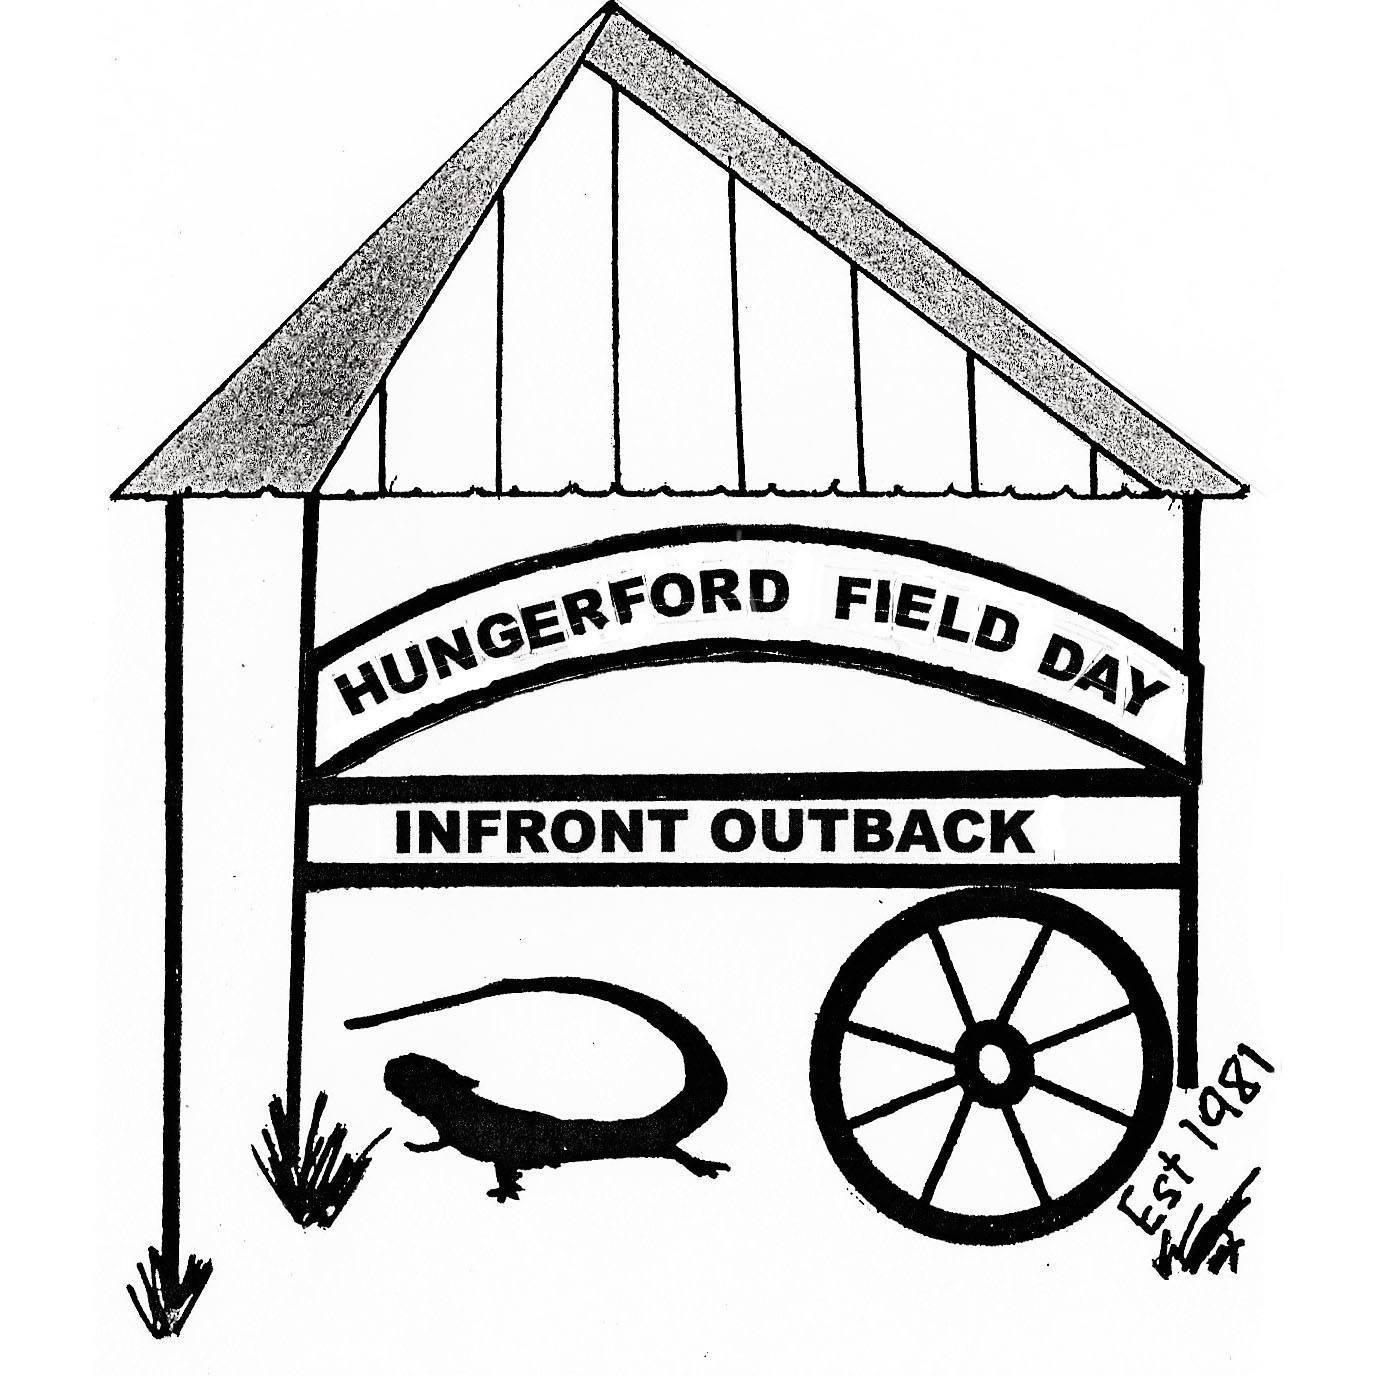 Hungerford Field Day